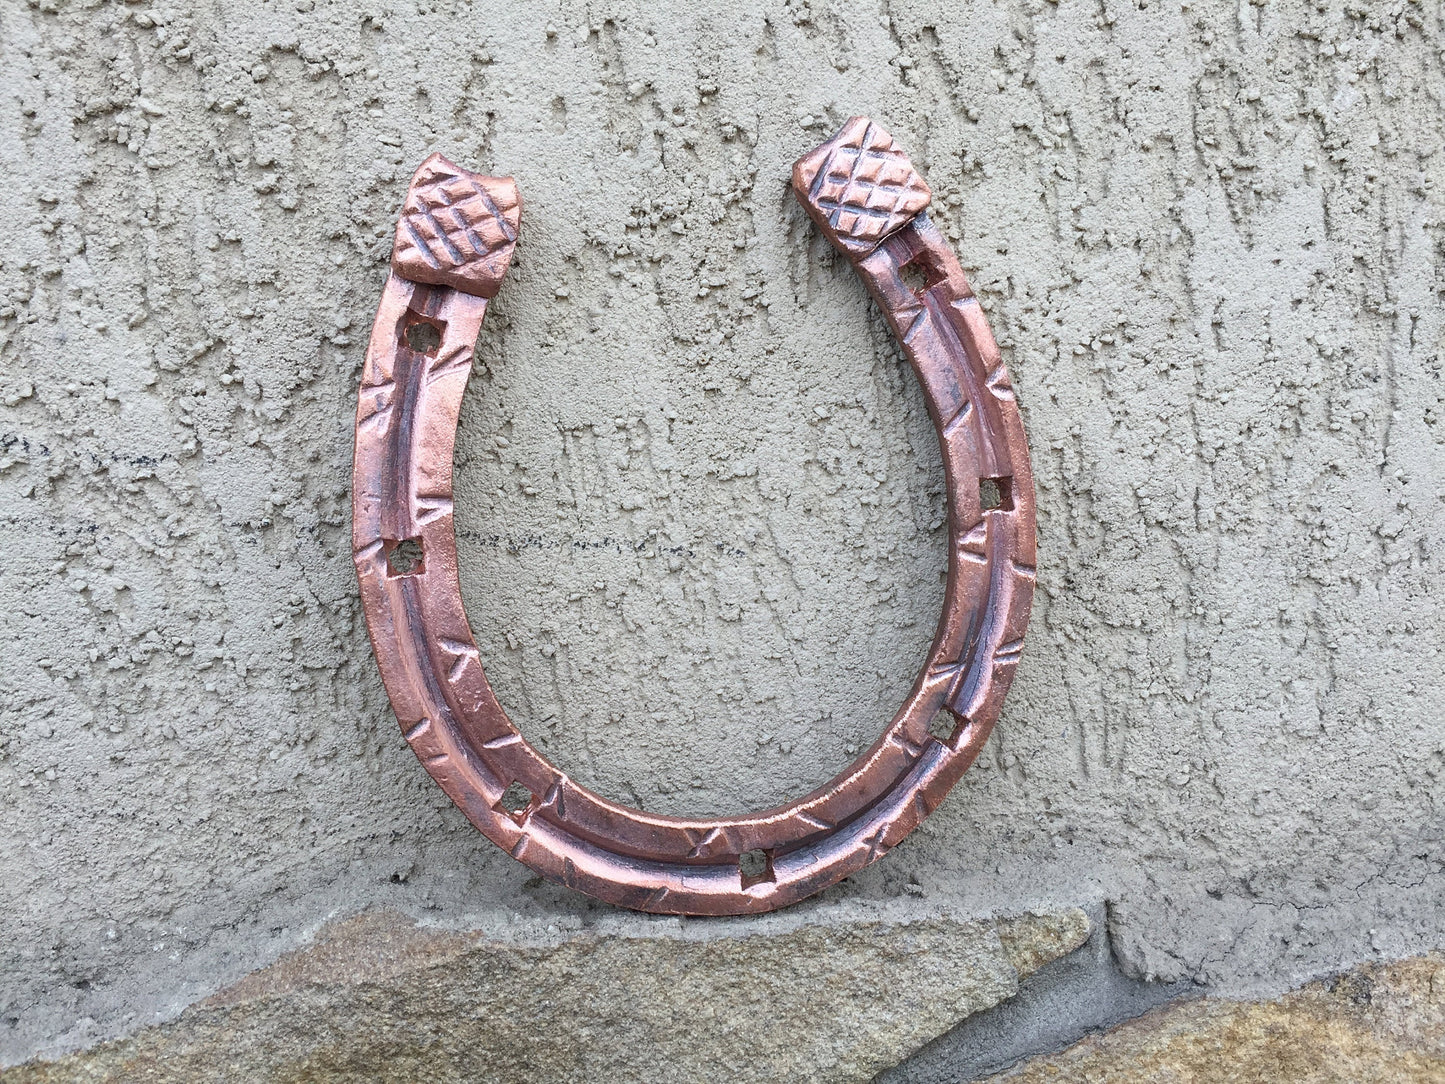 7 year gifts, 7th anniversary gift, copper horseshoe, copper gifts, engagement, love talisman, lucky horseshoe, married couple, forged heart